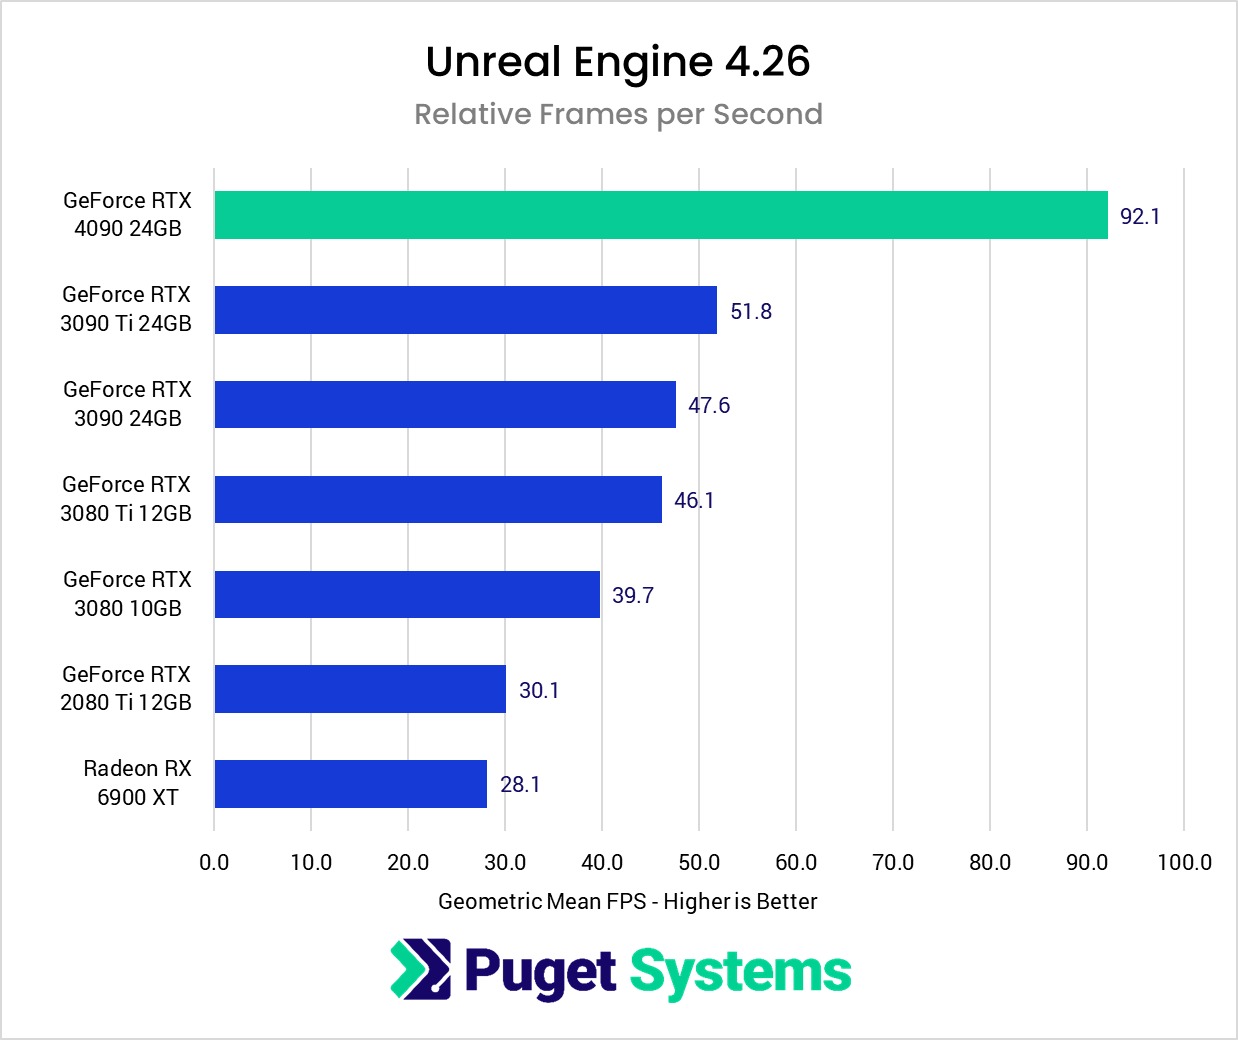 chart showing Unreal Engine results of the NVIDIA RTX 4090 compared to the previous 3000 series.